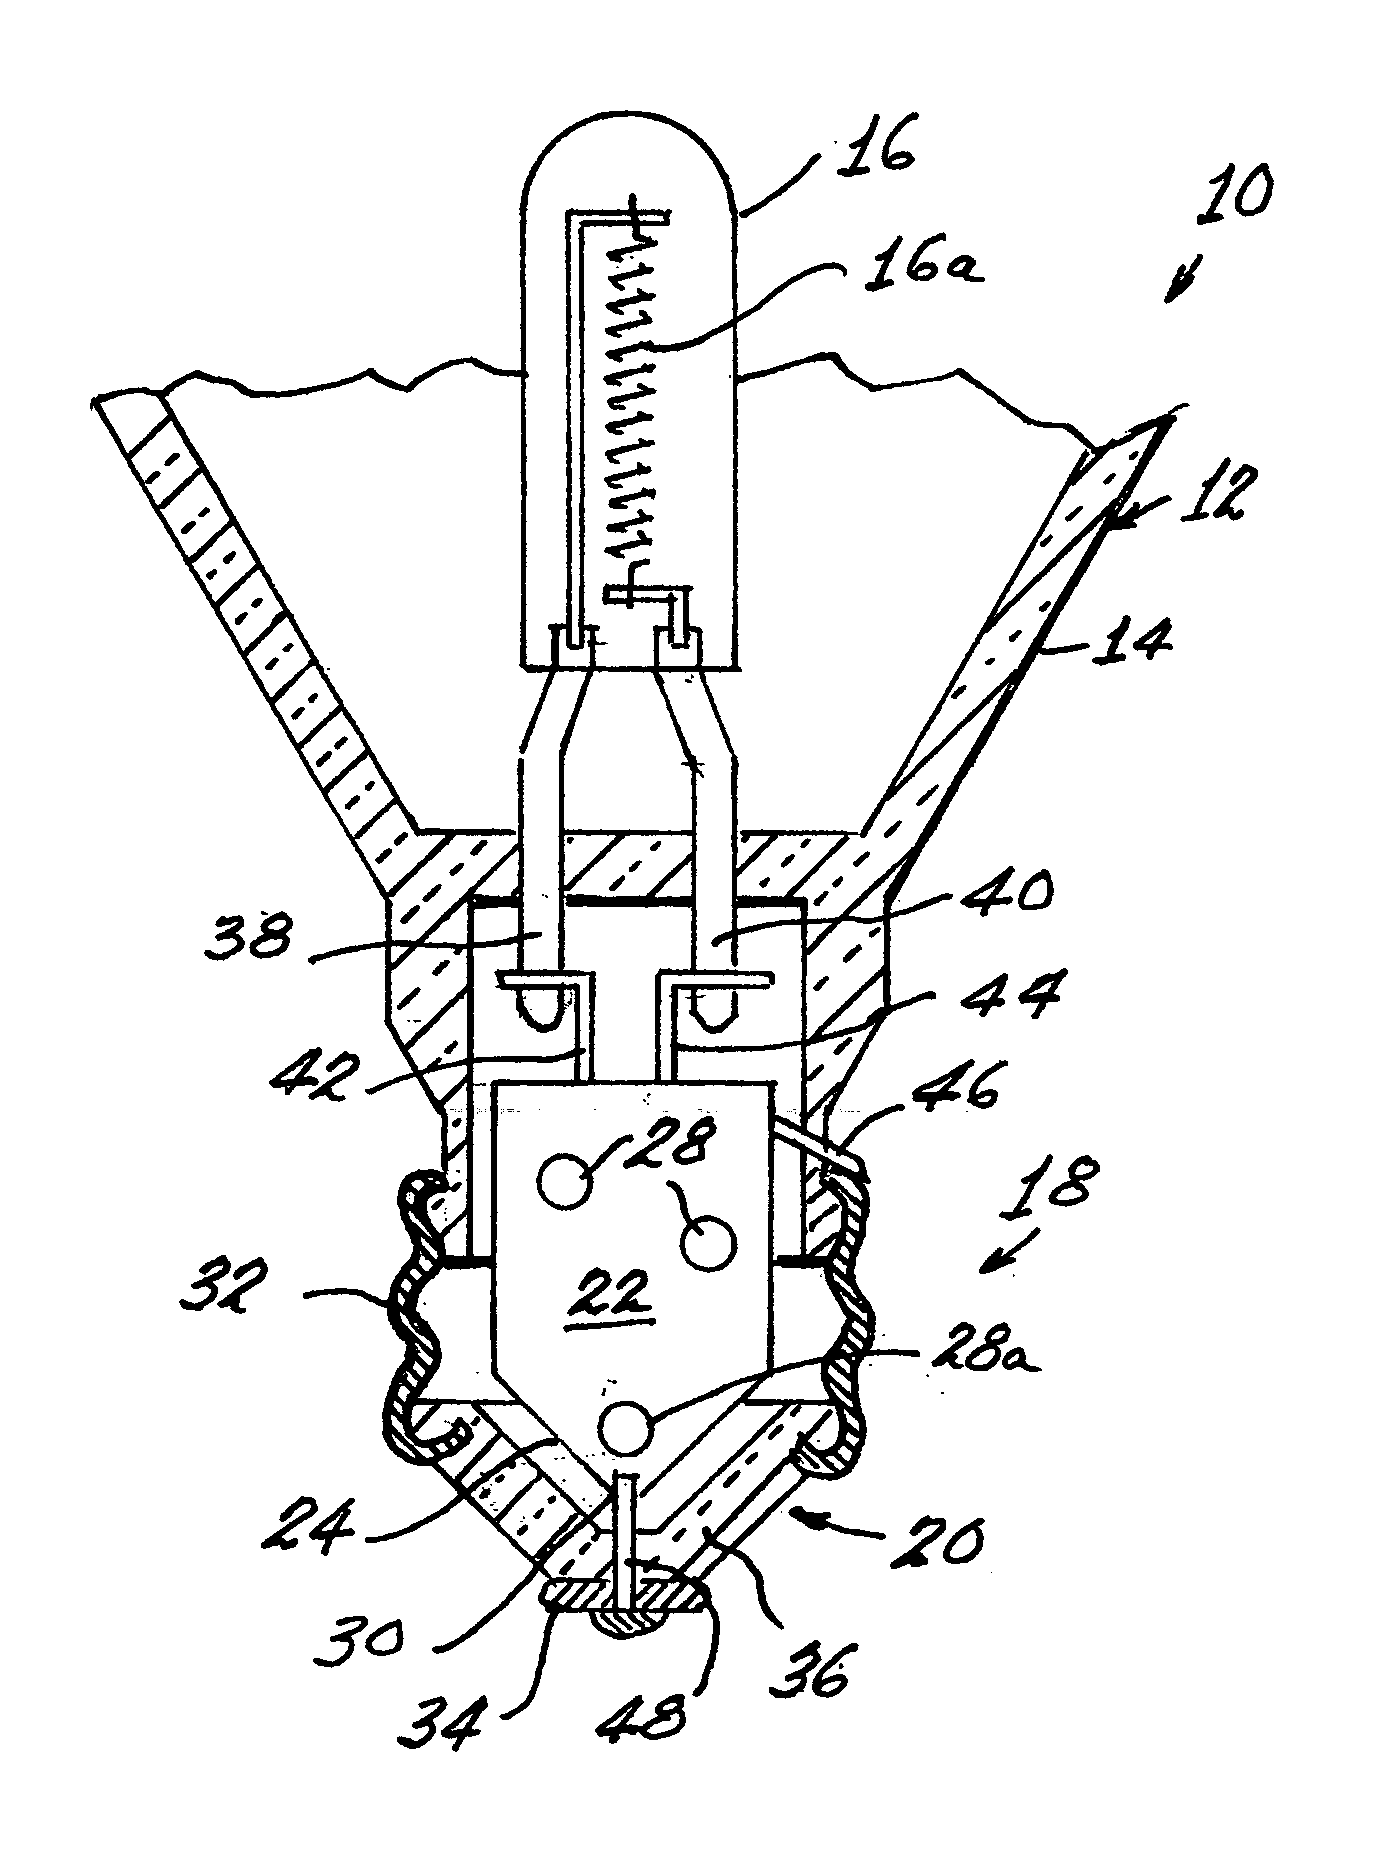 Lamp with integral power supply